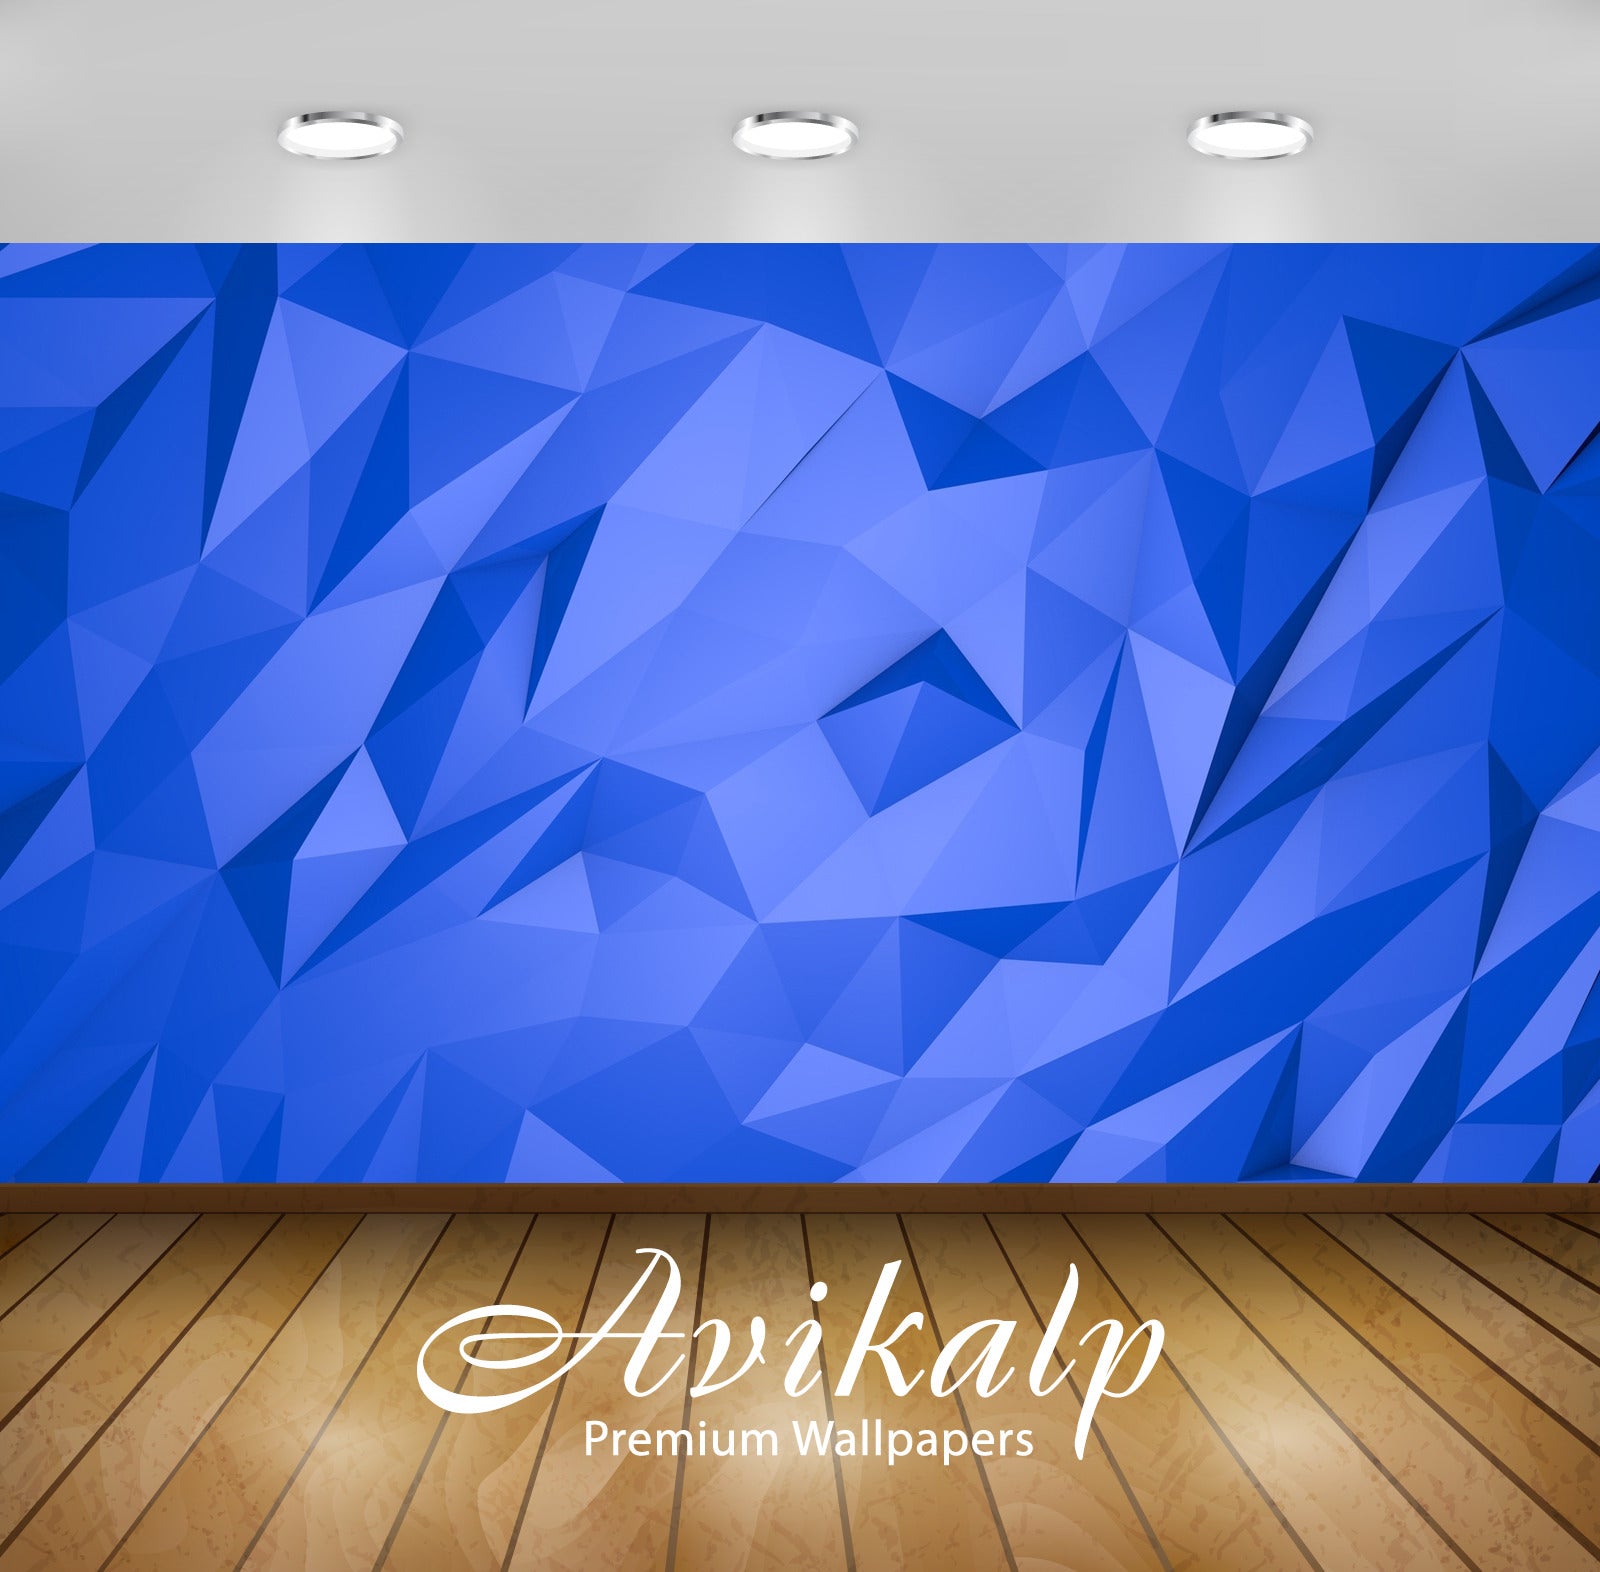 Avikalp Exclusive Awi4066 Blue Pyramids Full HD Wallpapers for Living room, Hall, Kids Room, Kitchen